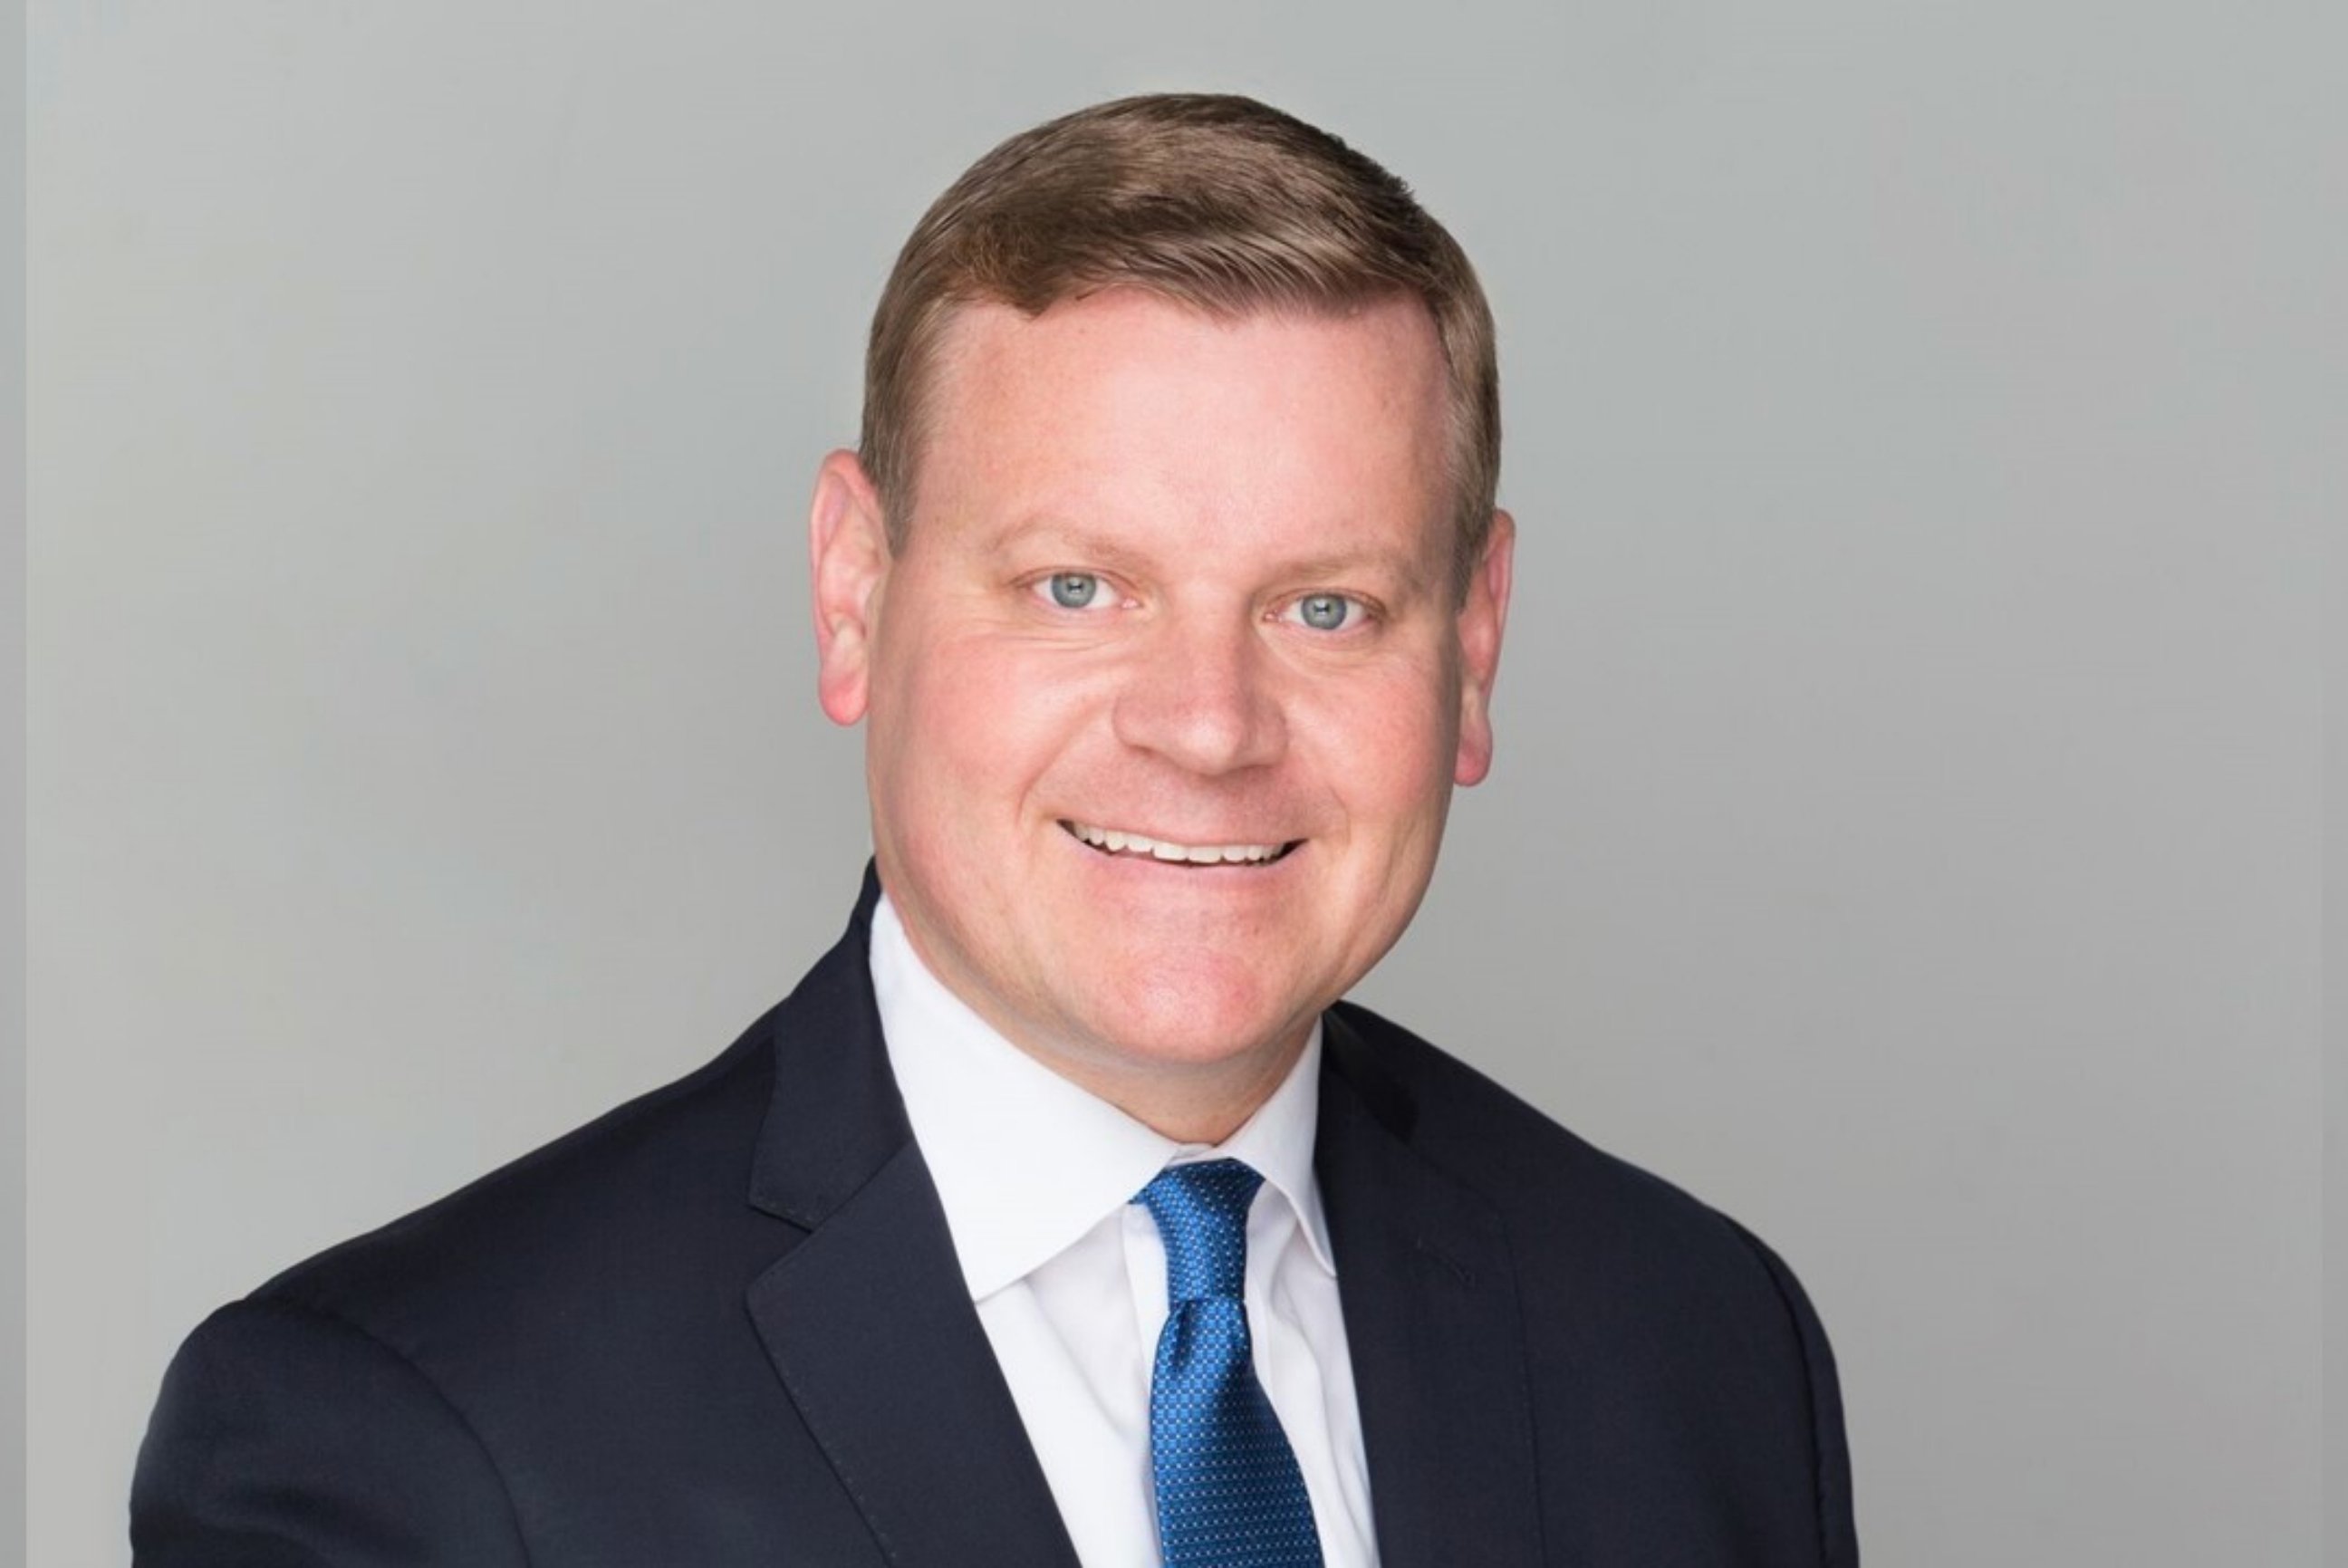 headshot of Gerald goss, executive Vice President of government and aviation security business at MSA security